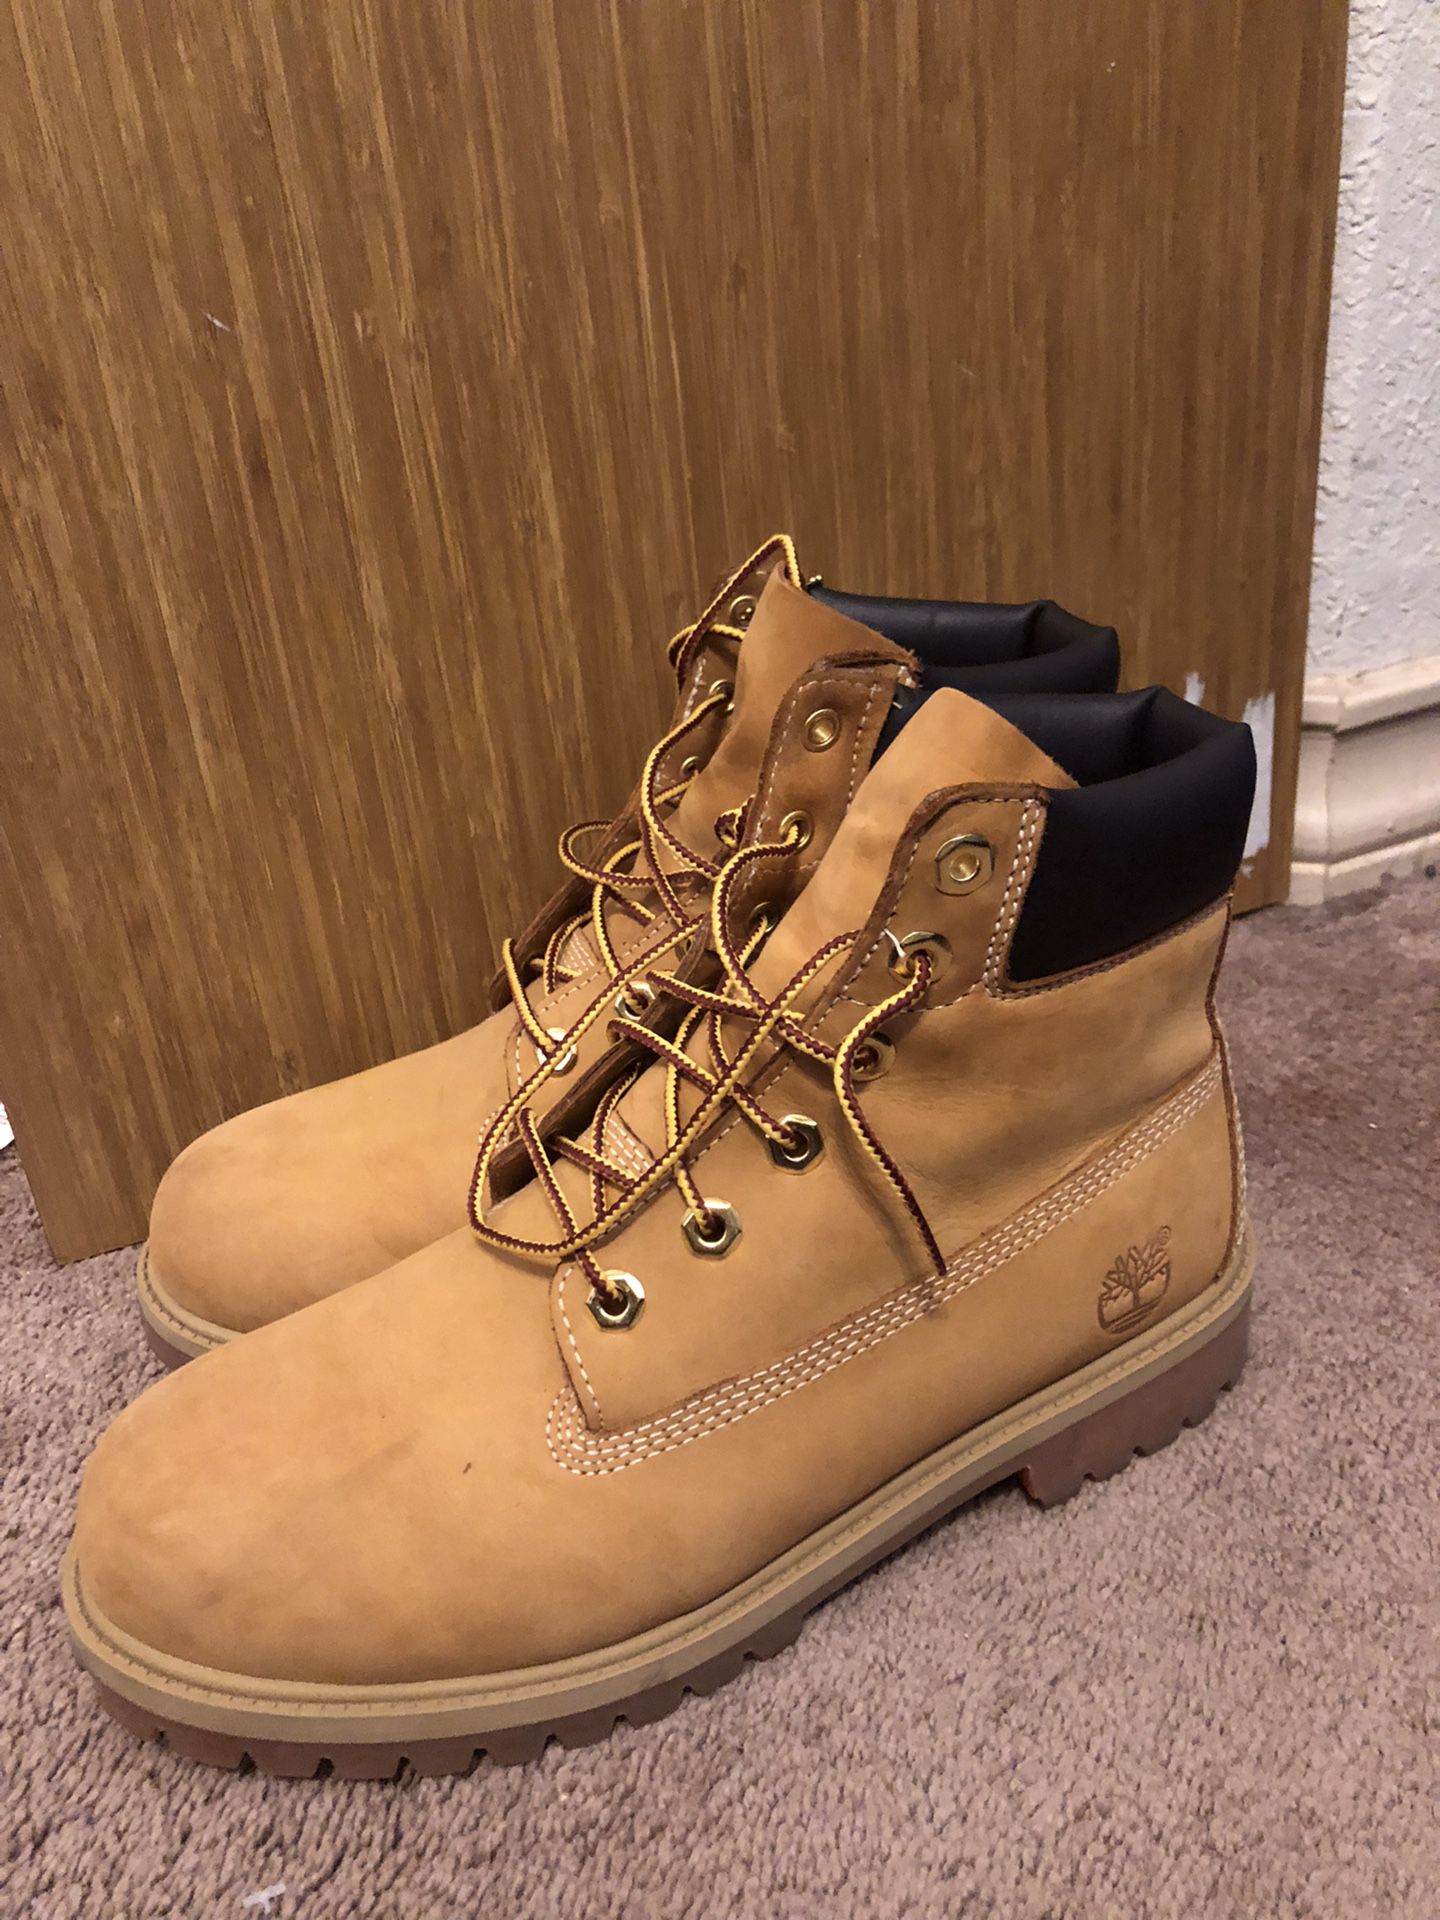 BRAND NEW Timberland Boots And Combat Boots